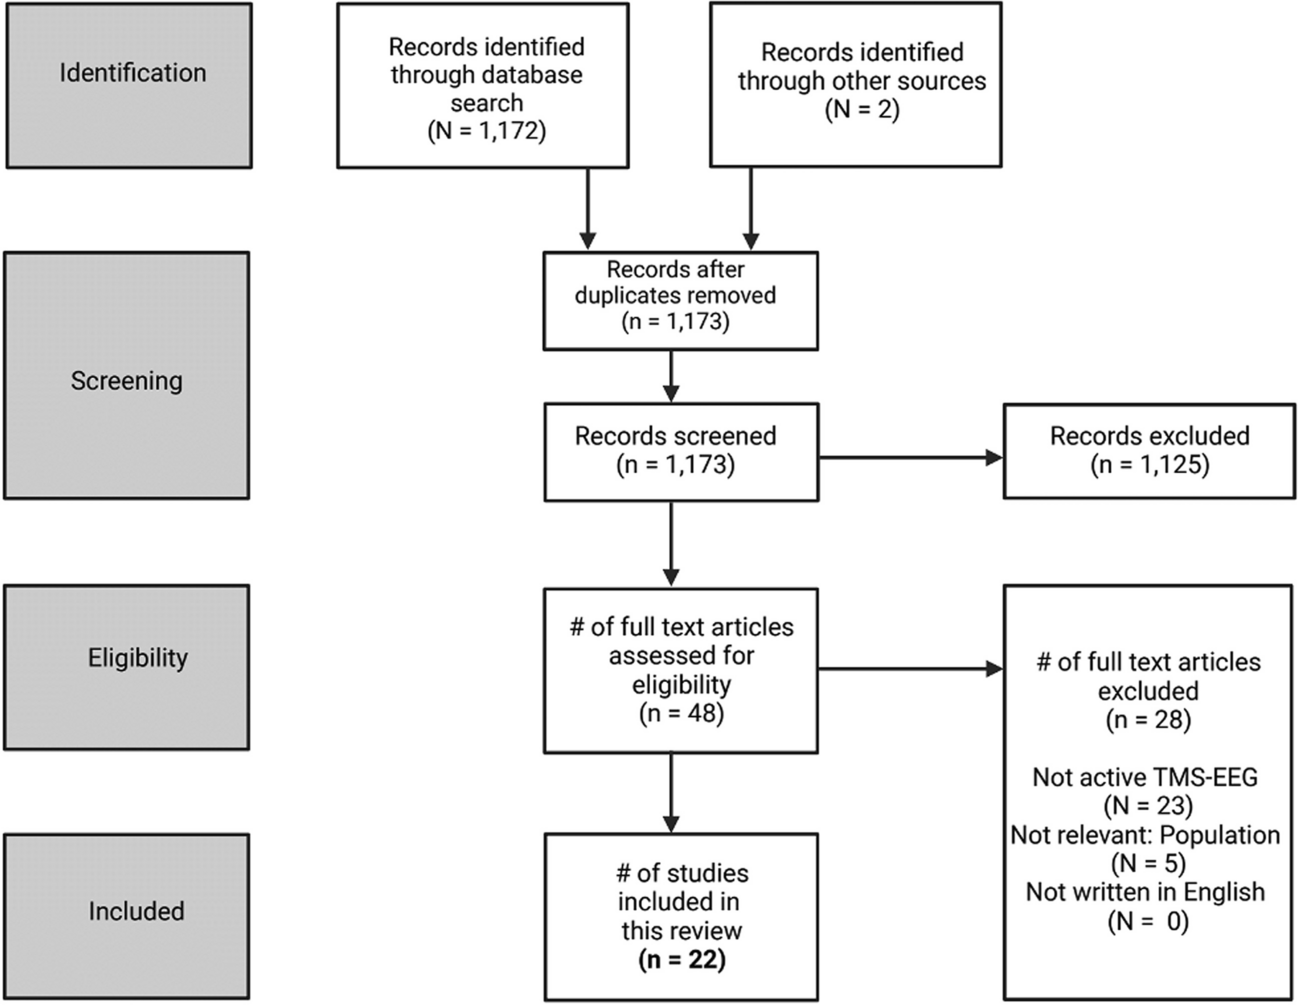 Exploring the potential of combining transcranial magnetic stimulation and electroencephalography to investigate mild cognitive impairment and Alzheimer’s disease: a systematic review